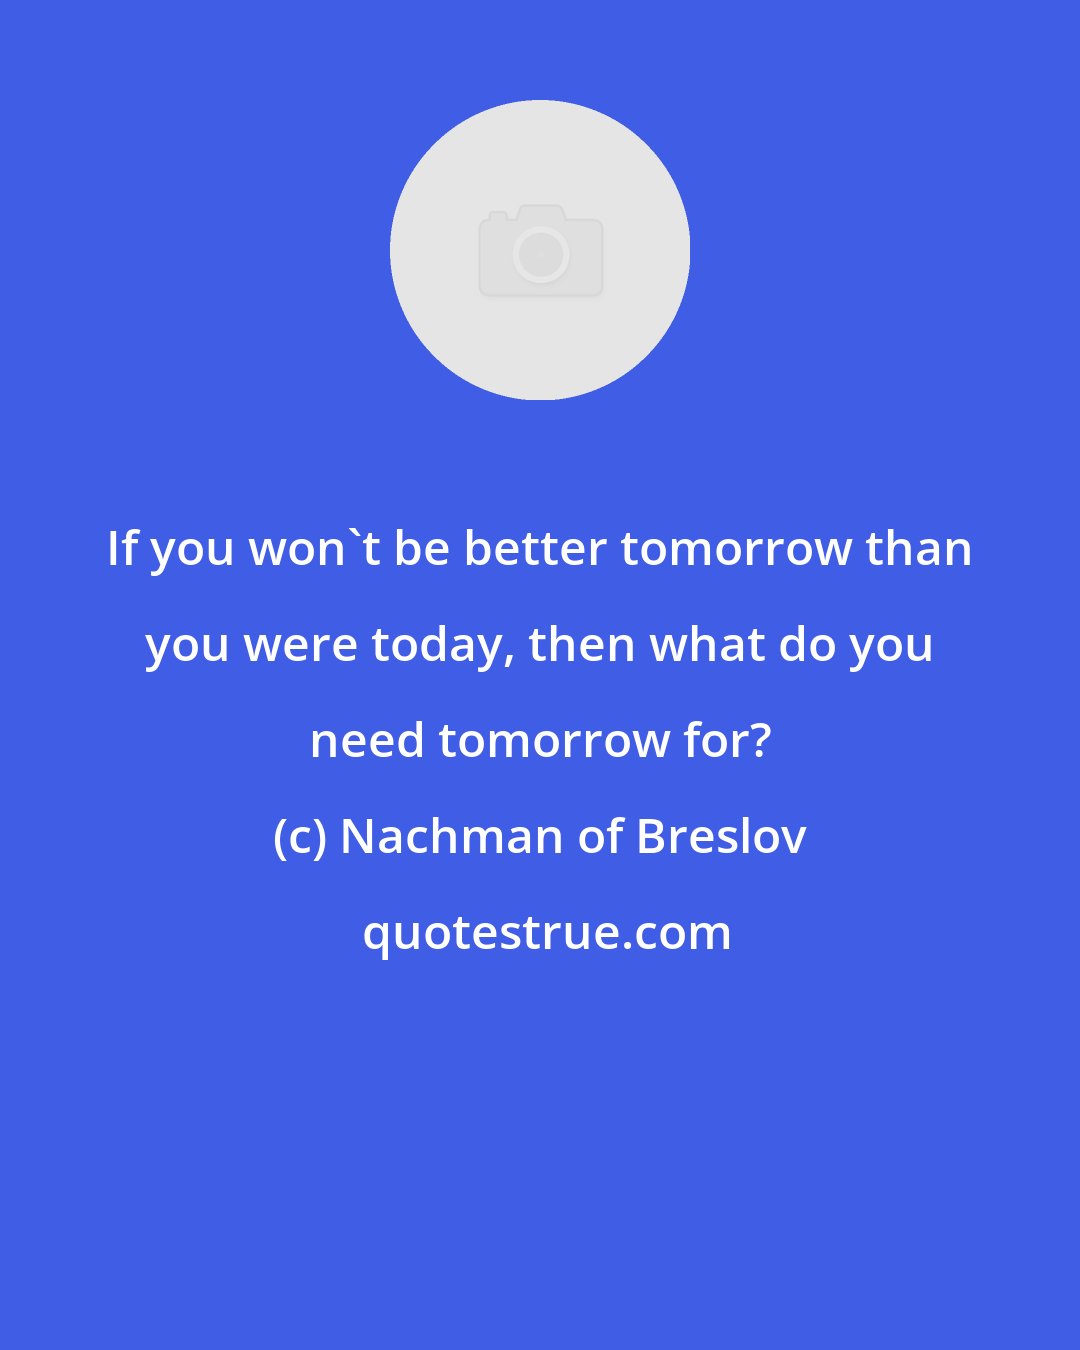 Nachman of Breslov: If you won't be better tomorrow than you were today, then what do you need tomorrow for?